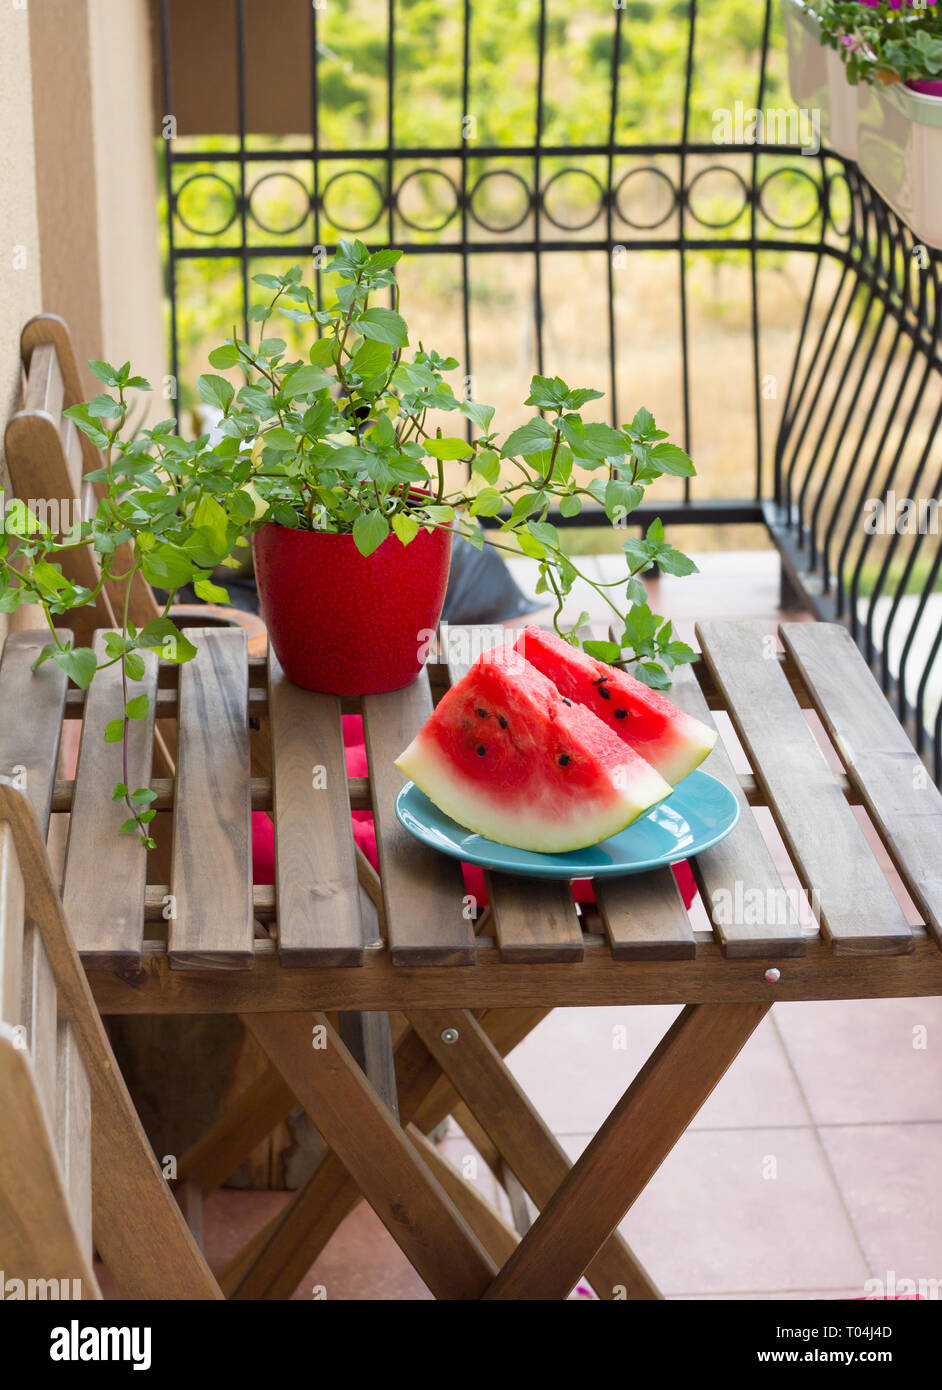 Sliced watermelon on wooden table outdoor Stock Photo